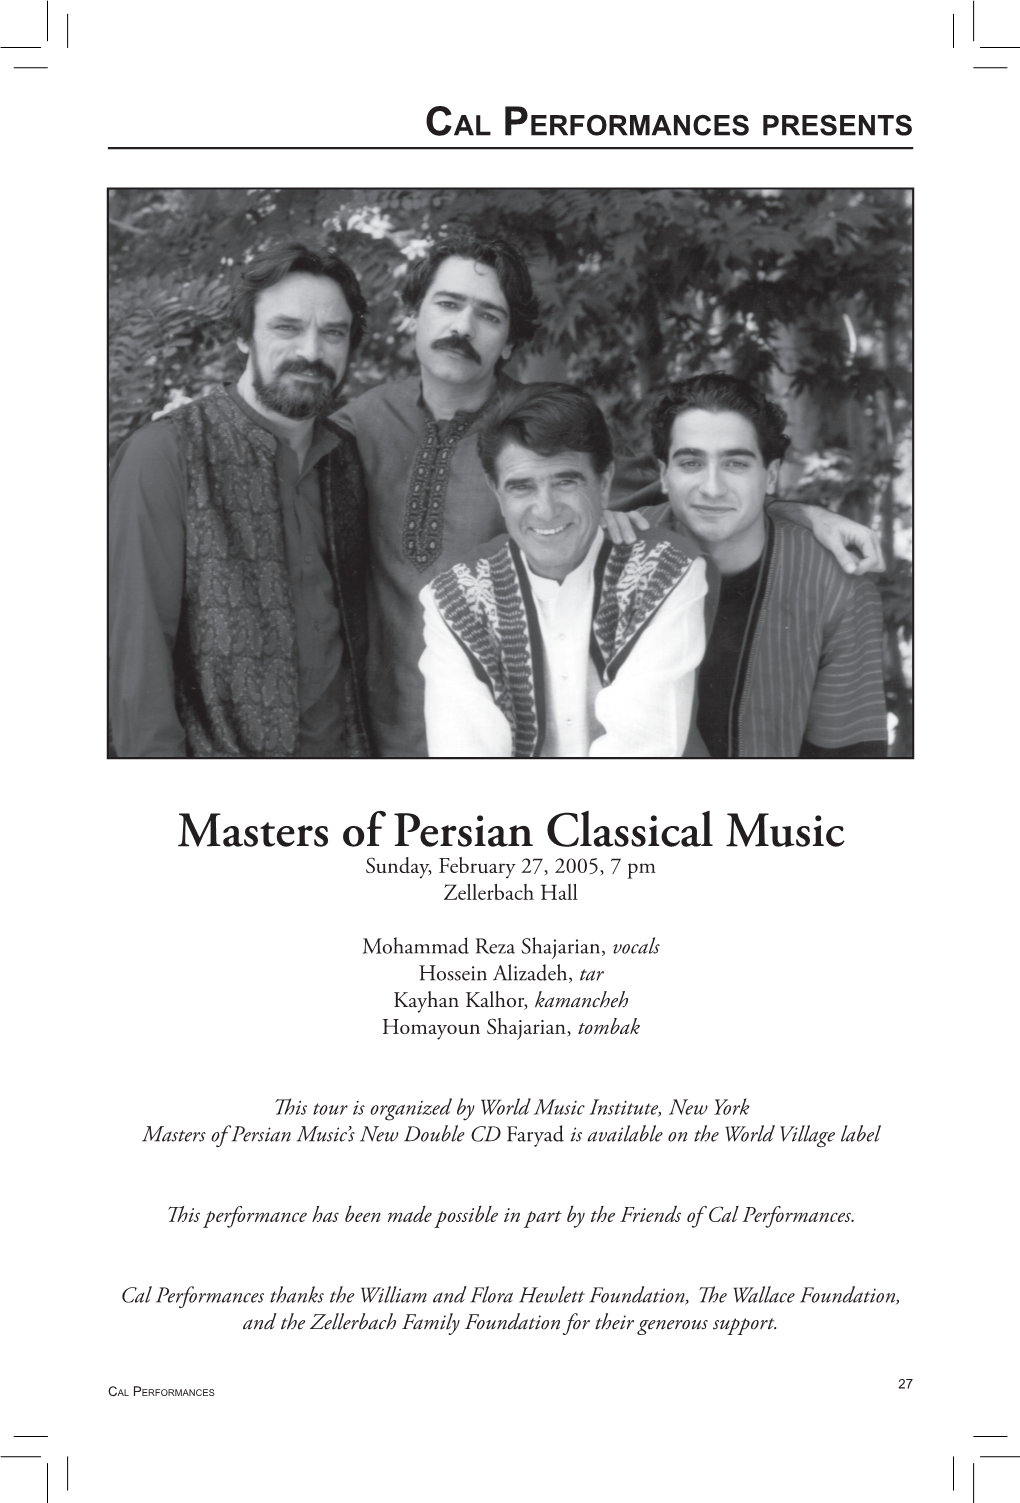 Masters of Persian Classical Music Sunday, February 27, 2005, 7 Pm Zellerbach Hall